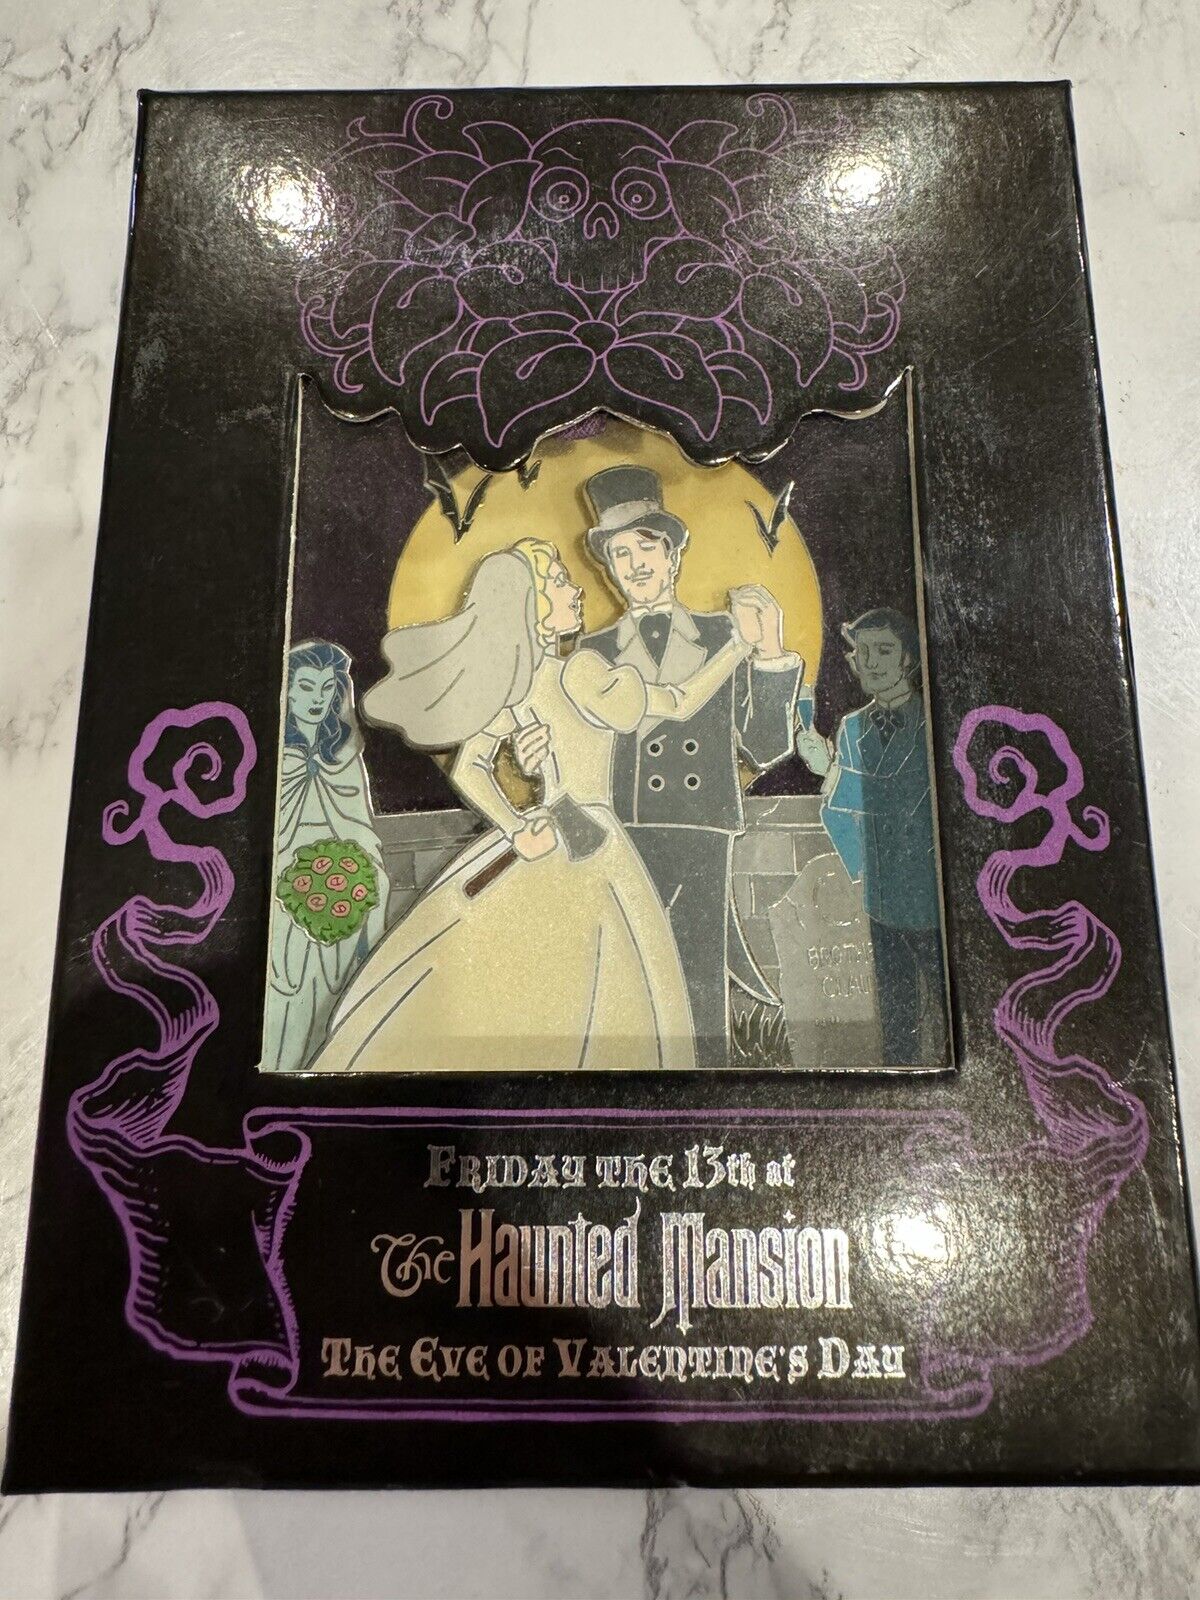 Disney Haunted Mansion Pin Friday the 13th Eve Of Valentines Day Jumbo Bride LE